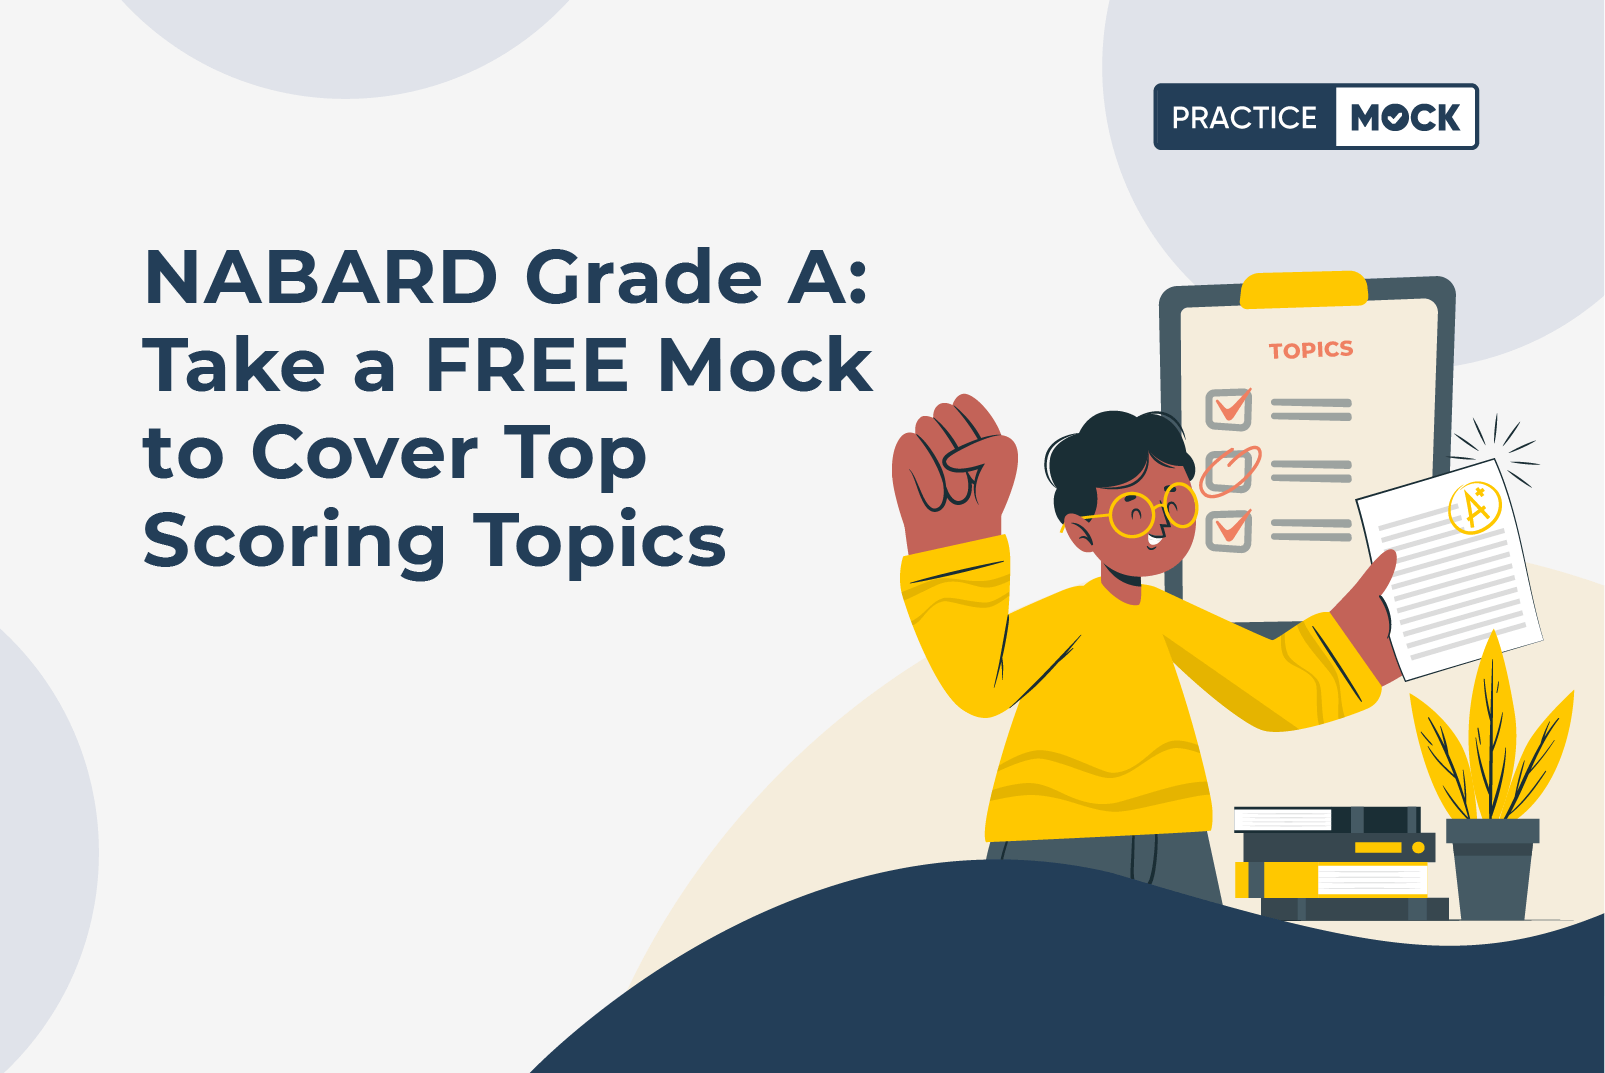 NABARD Grade A Take a FREE Mock to Cover Top Scoring Topics